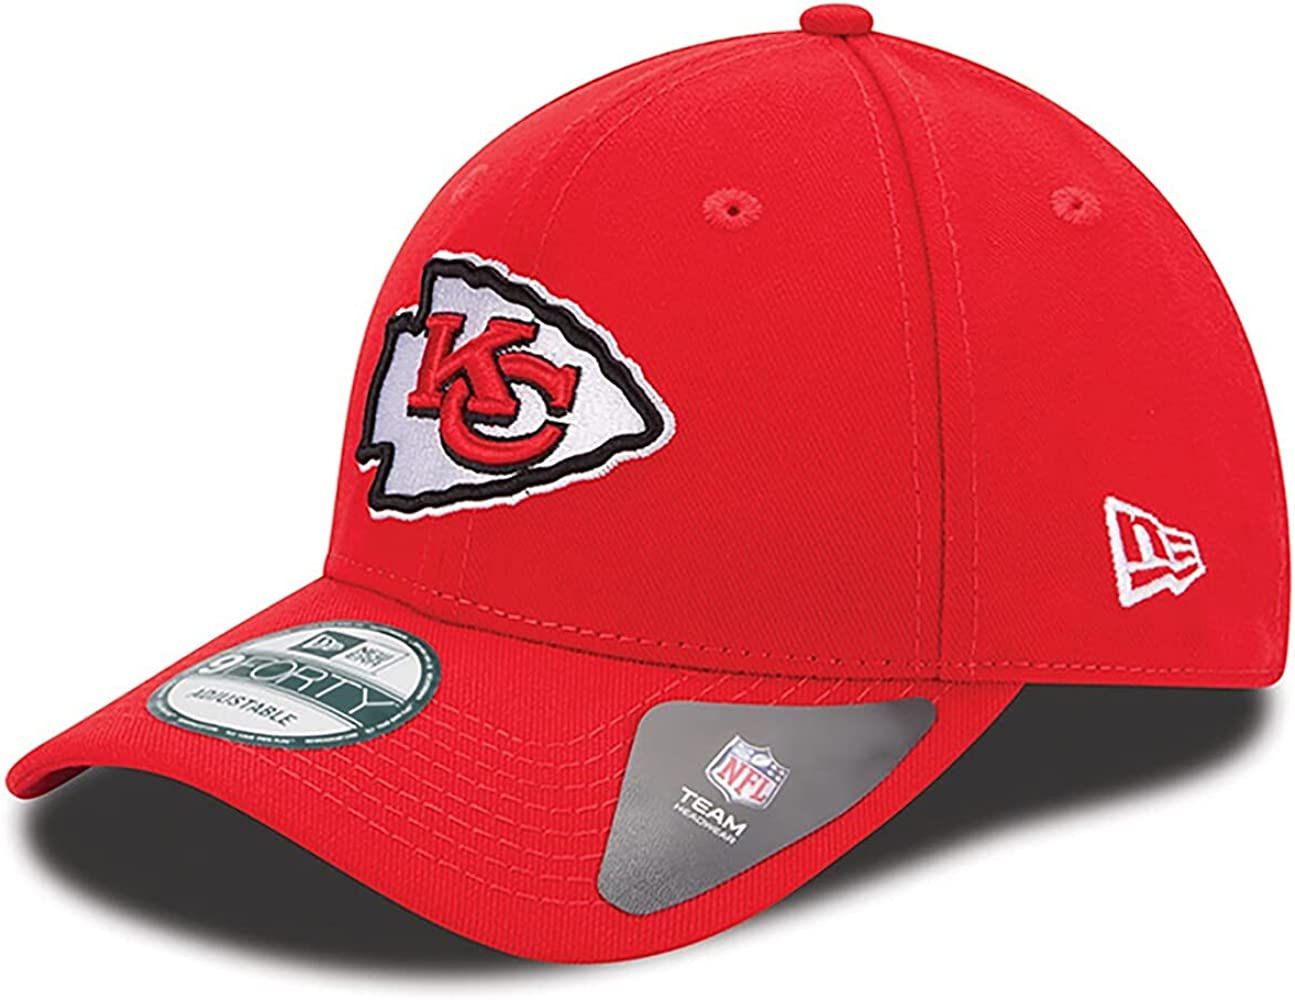 New Era NFL The League 9FORTY Adjustable Hat Cap One Size Fits All | Amazon (US)